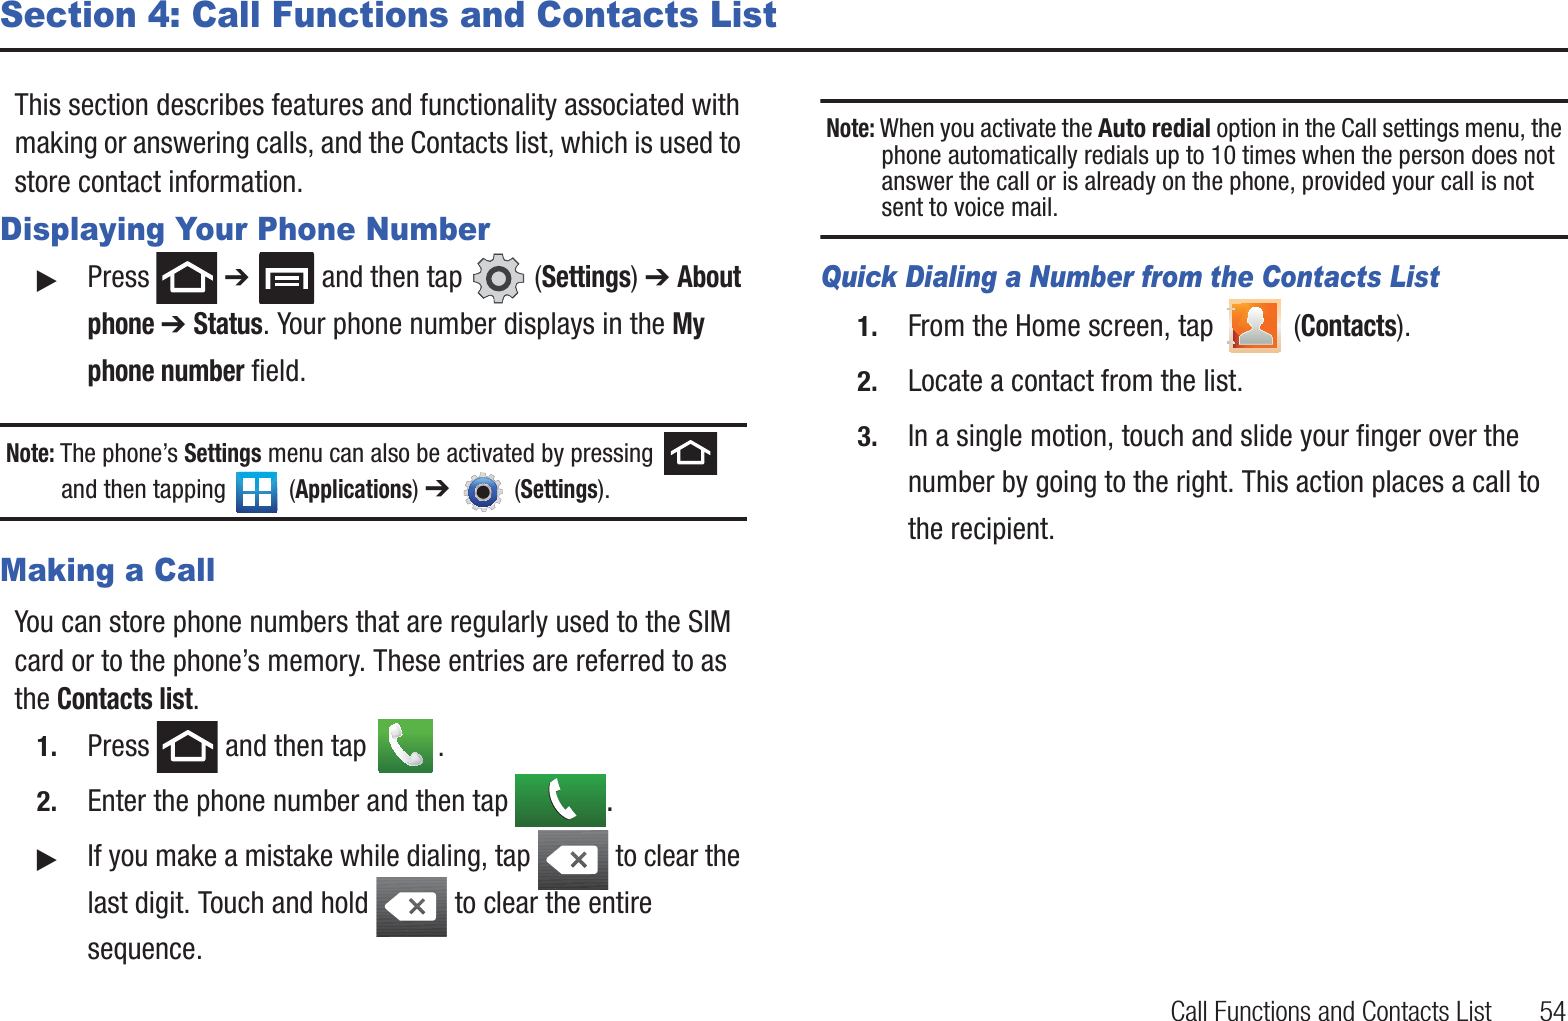 Call Functions and Contacts List       54Section 4: Call Functions and Contacts ListThis section describes features and functionality associated with making or answering calls, and the Contacts list, which is used to store contact information.Displaying Your Phone Number䊳Press  ➔   and then tap   (Settings) ➔ About phone ➔ Status. Your phone number displays in the My phone number field. Note: The phone’s Settings menu can also be activated by pressing   and then tapping   (Applications) ➔   (Settings).Making a CallYou can store phone numbers that are regularly used to the SIM card or to the phone’s memory. These entries are referred to as the Contacts list.1. Press   and then tap  . 2. Enter the phone number and then tap  .䊳If you make a mistake while dialing, tap   to clear the last digit. Touch and hold   to clear the entire sequence.Note: When you activate the Auto redial option in the Call settings menu, the phone automatically redials up to 10 times when the person does not answer the call or is already on the phone, provided your call is not sent to voice mail.Quick Dialing a Number from the Contacts List1. From the Home screen, tap   (Contacts).2. Locate a contact from the list.3. In a single motion, touch and slide your finger over the number by going to the right. This action places a call to the recipient.